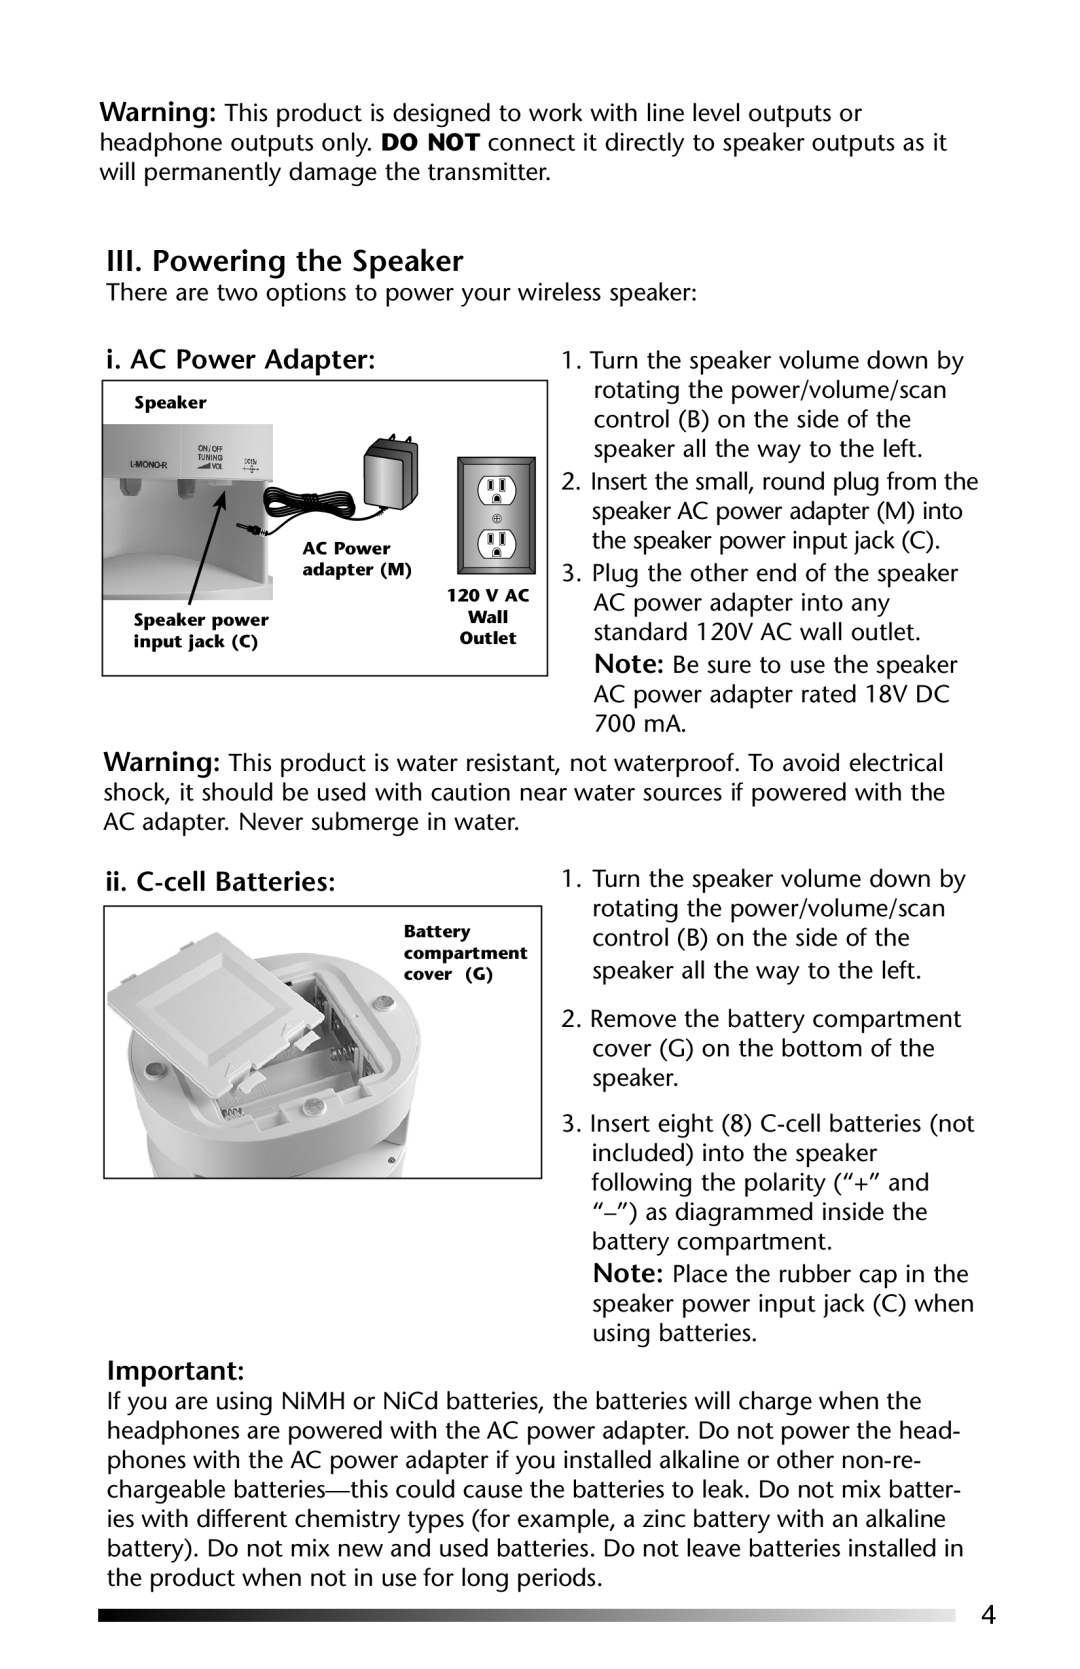 Acoustic Research AW-811 operation manual III. Powering the Speaker, i. AC Power Adapter, ii. C-cellBatteries 